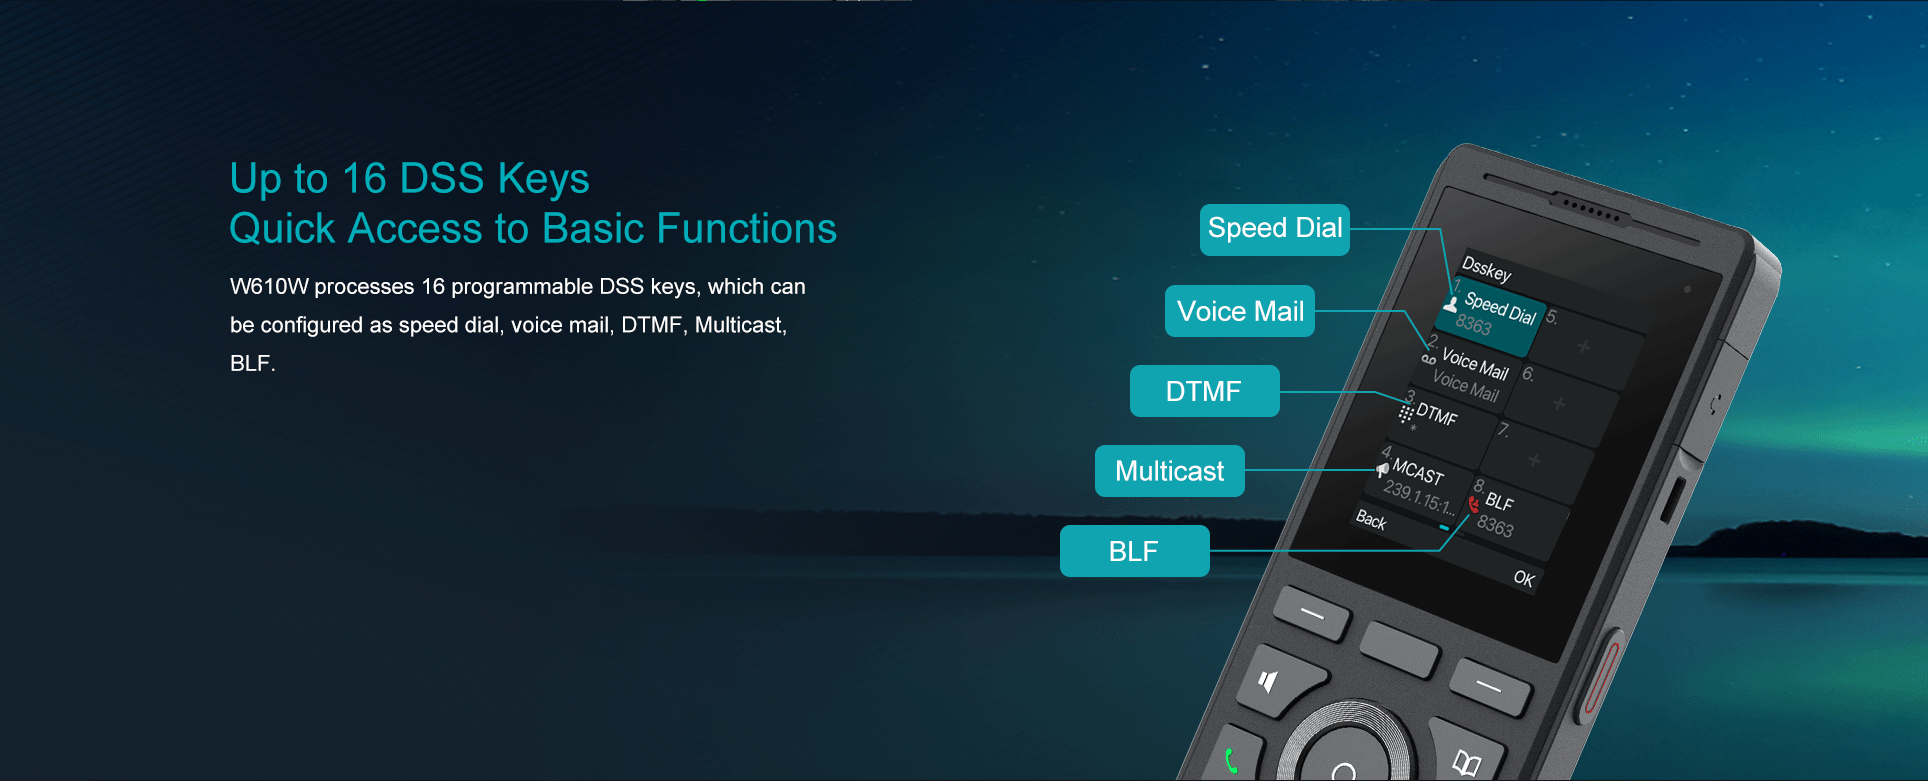 LINKVIL W610W is a portable, elegant Wi-Fi phone designed for mobile communication applications. With built-in dual-band 2.4GHz & 5GHz Wi-Fi